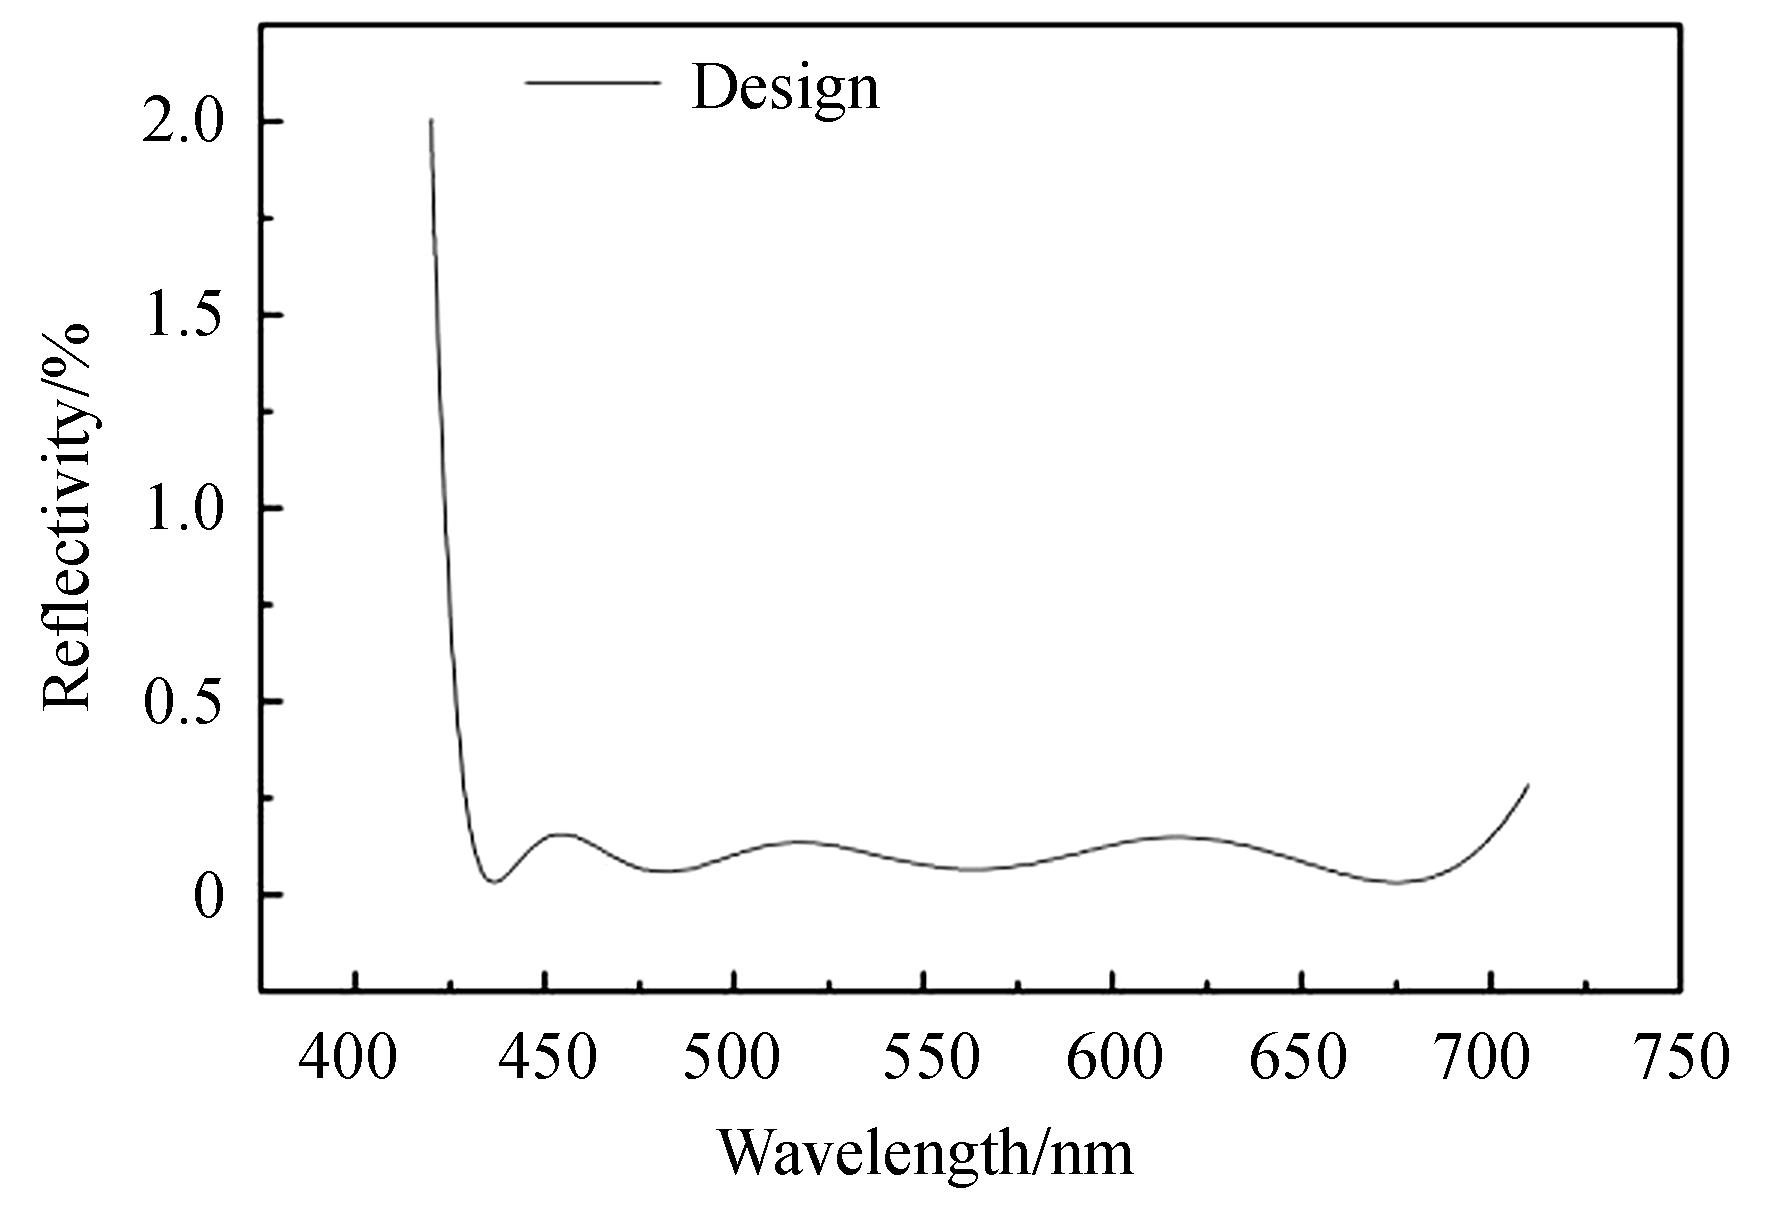 Theoretical design curve of antireflection film